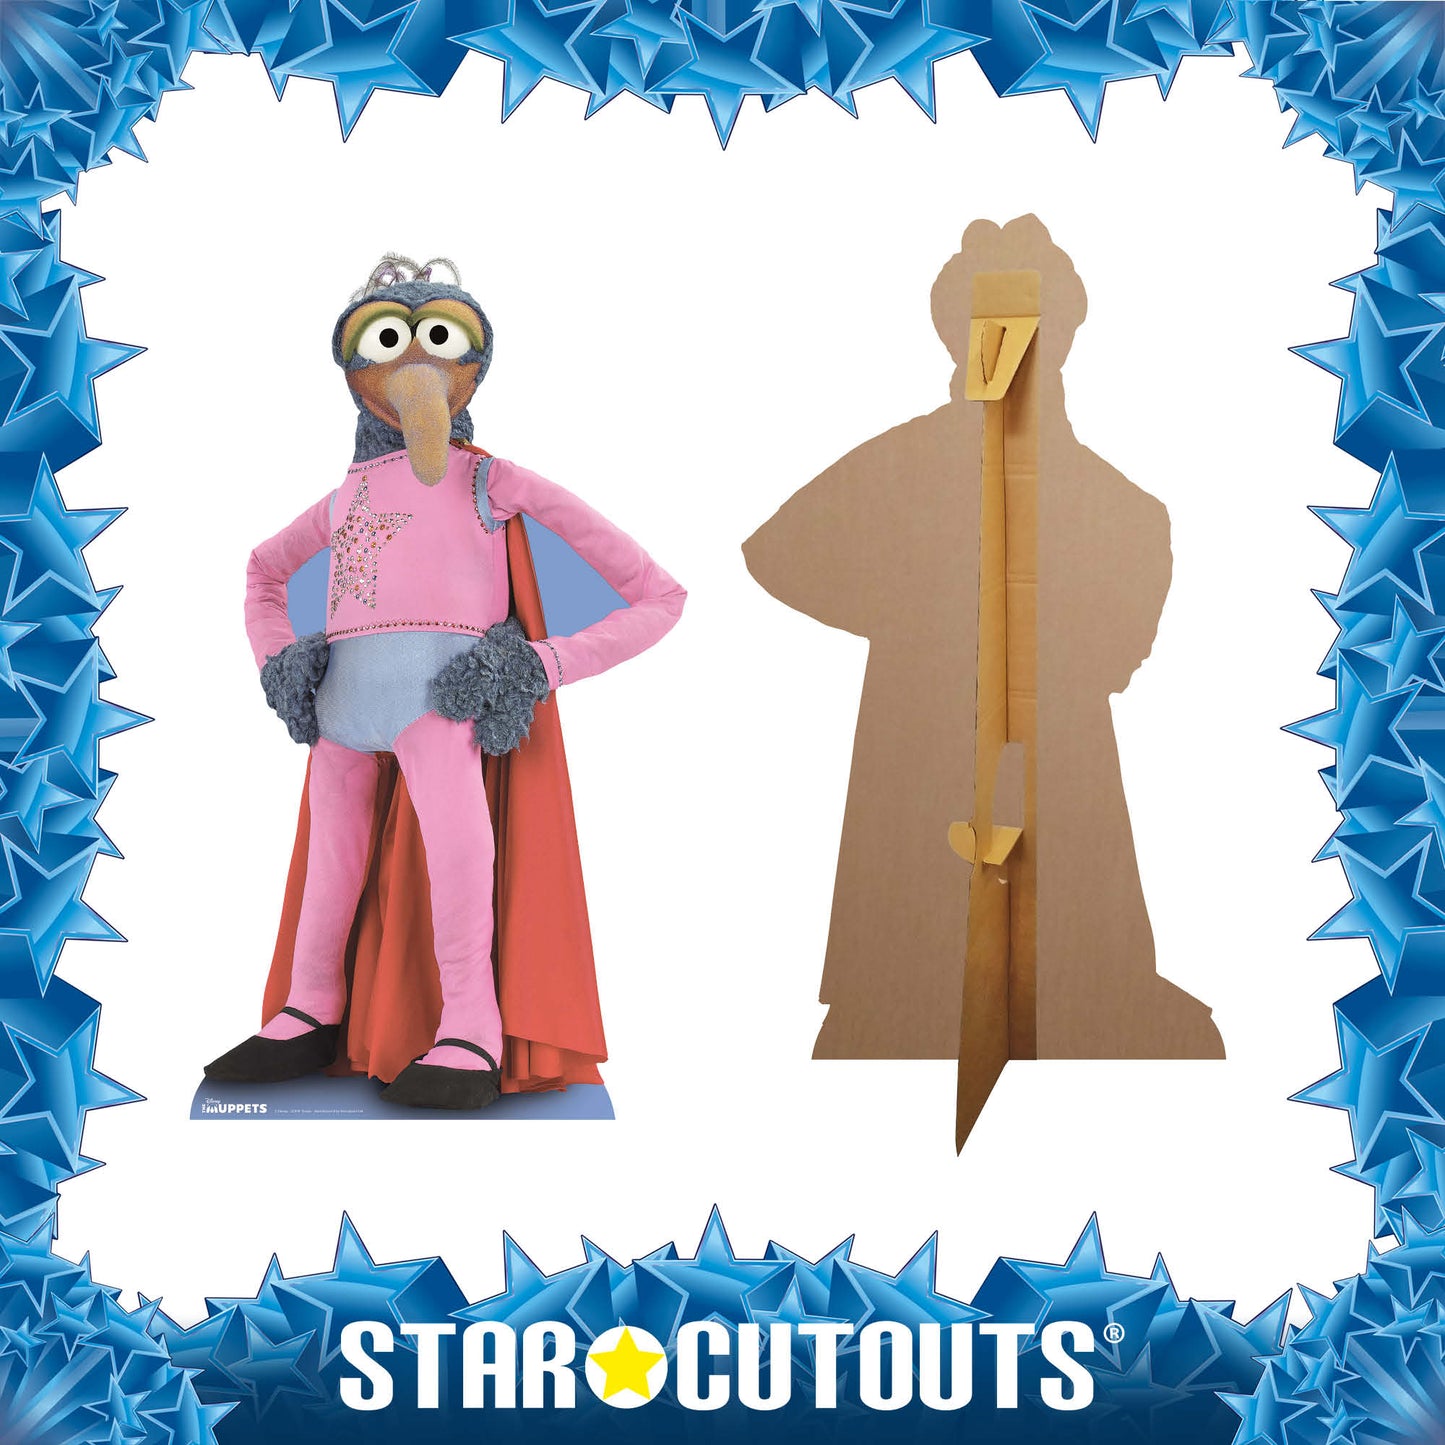 Gonzo Cardboard Cut Out Height 139cm